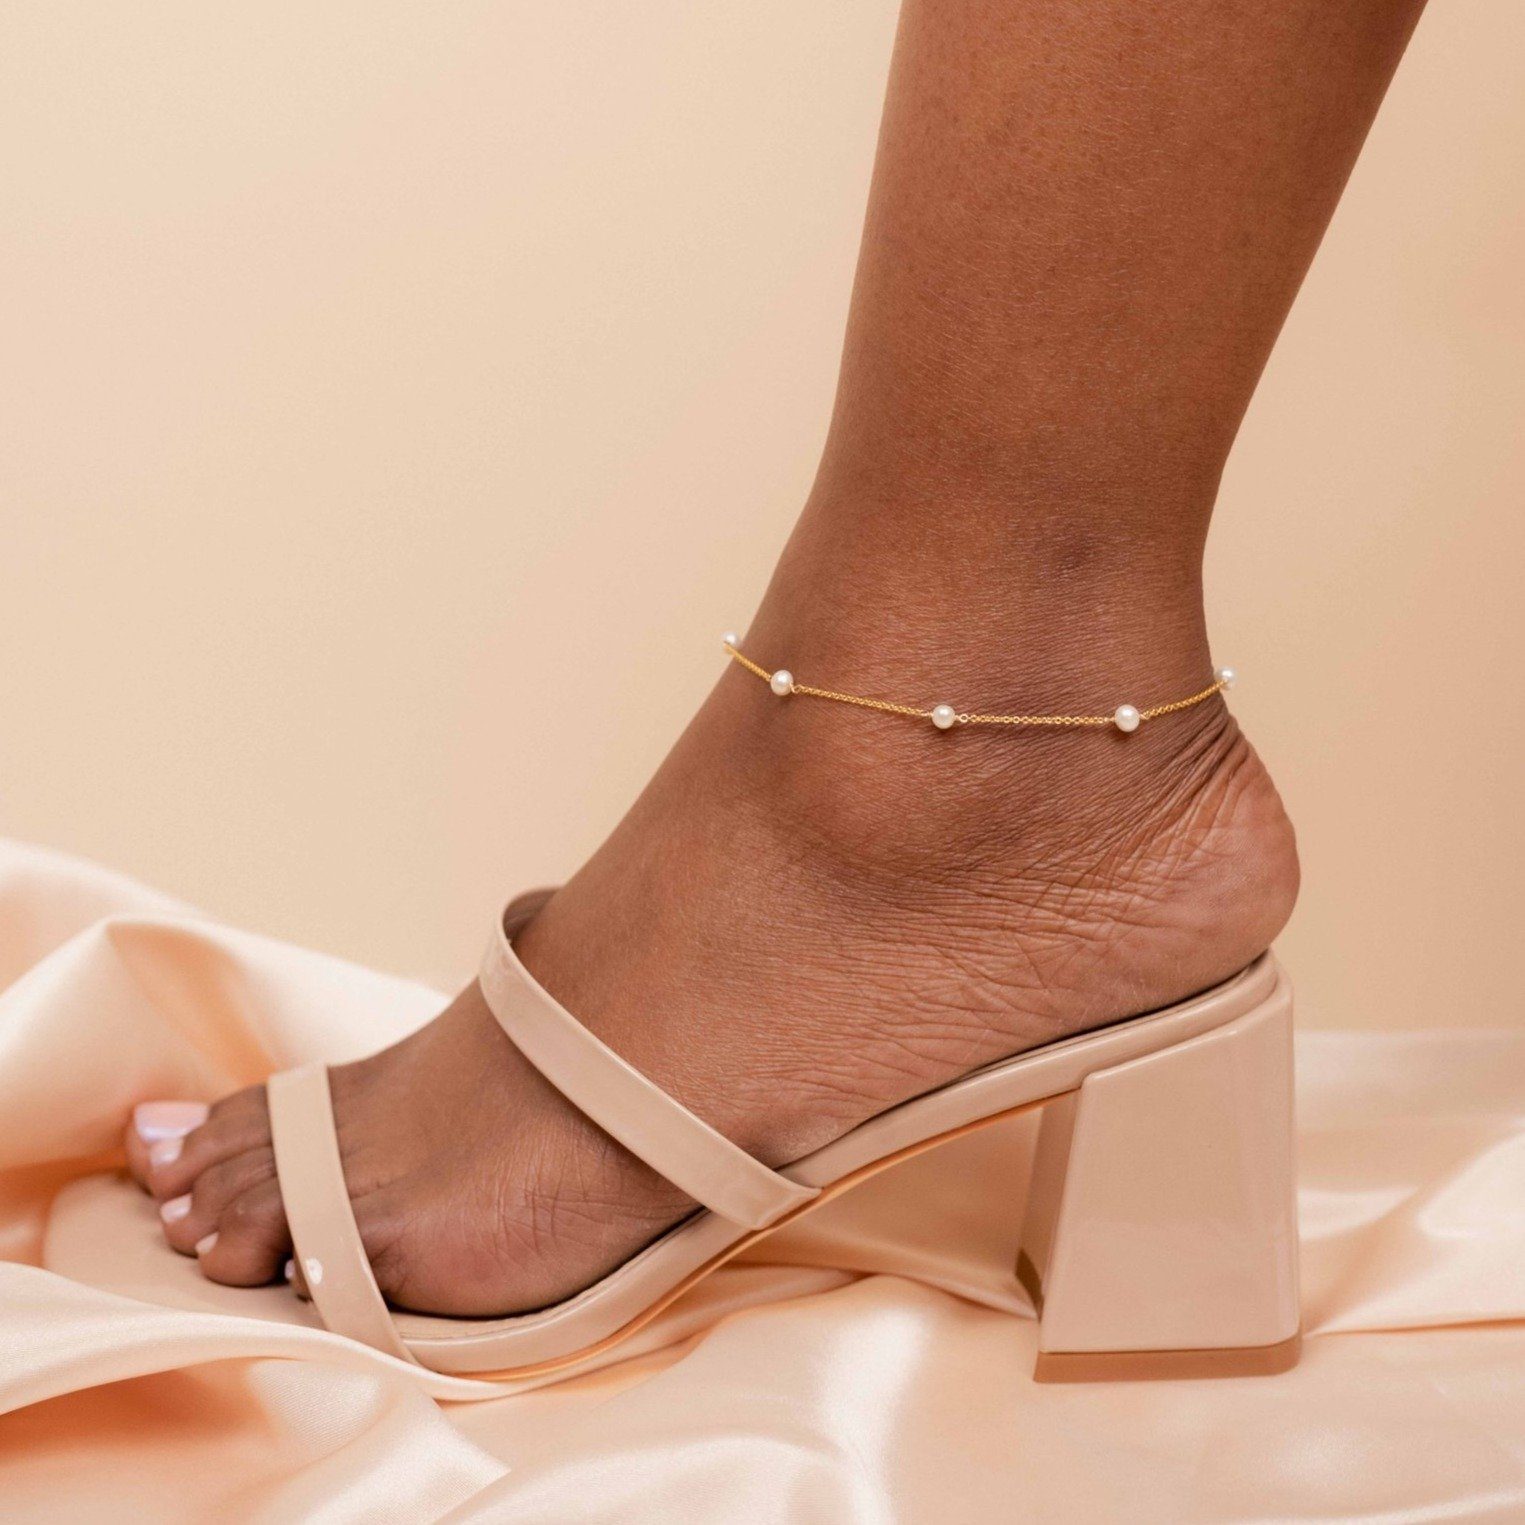 Dainty, handmade Pearl Anklet by Katie Dean Jewelry. Perfect for Summer!